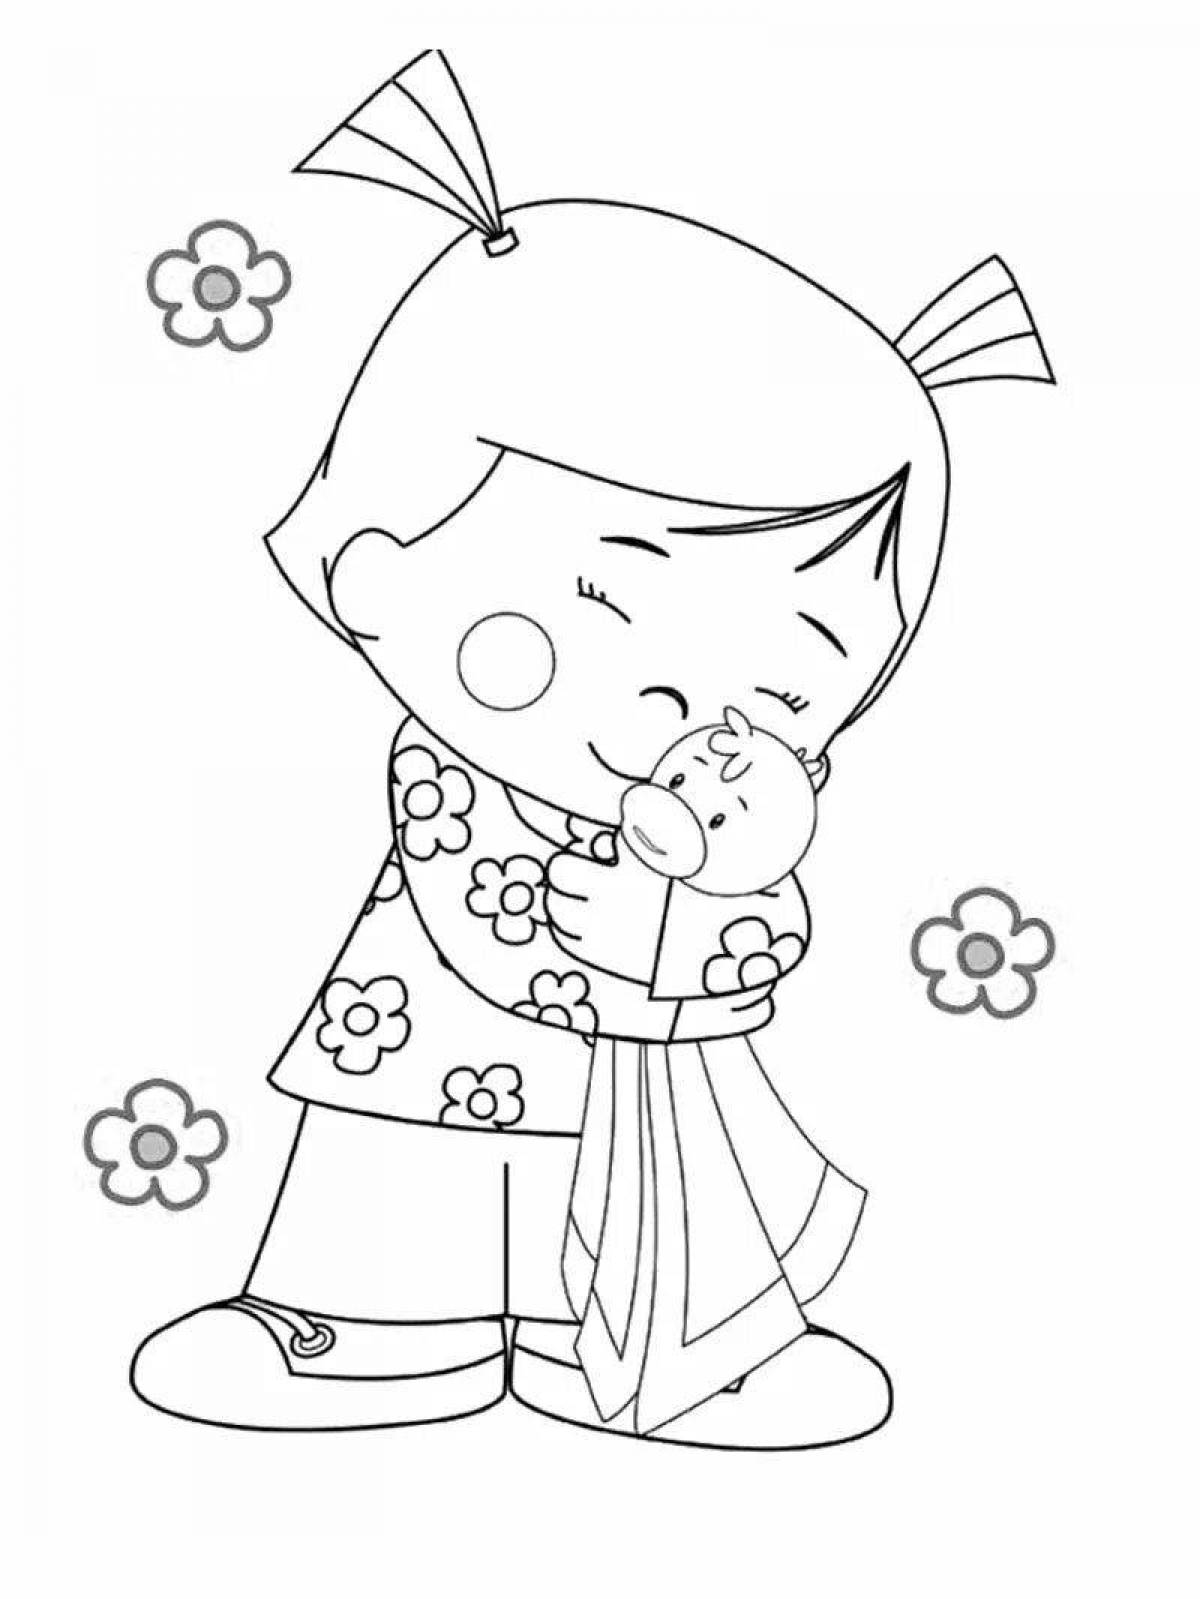 Chloe's vibrant coloring page